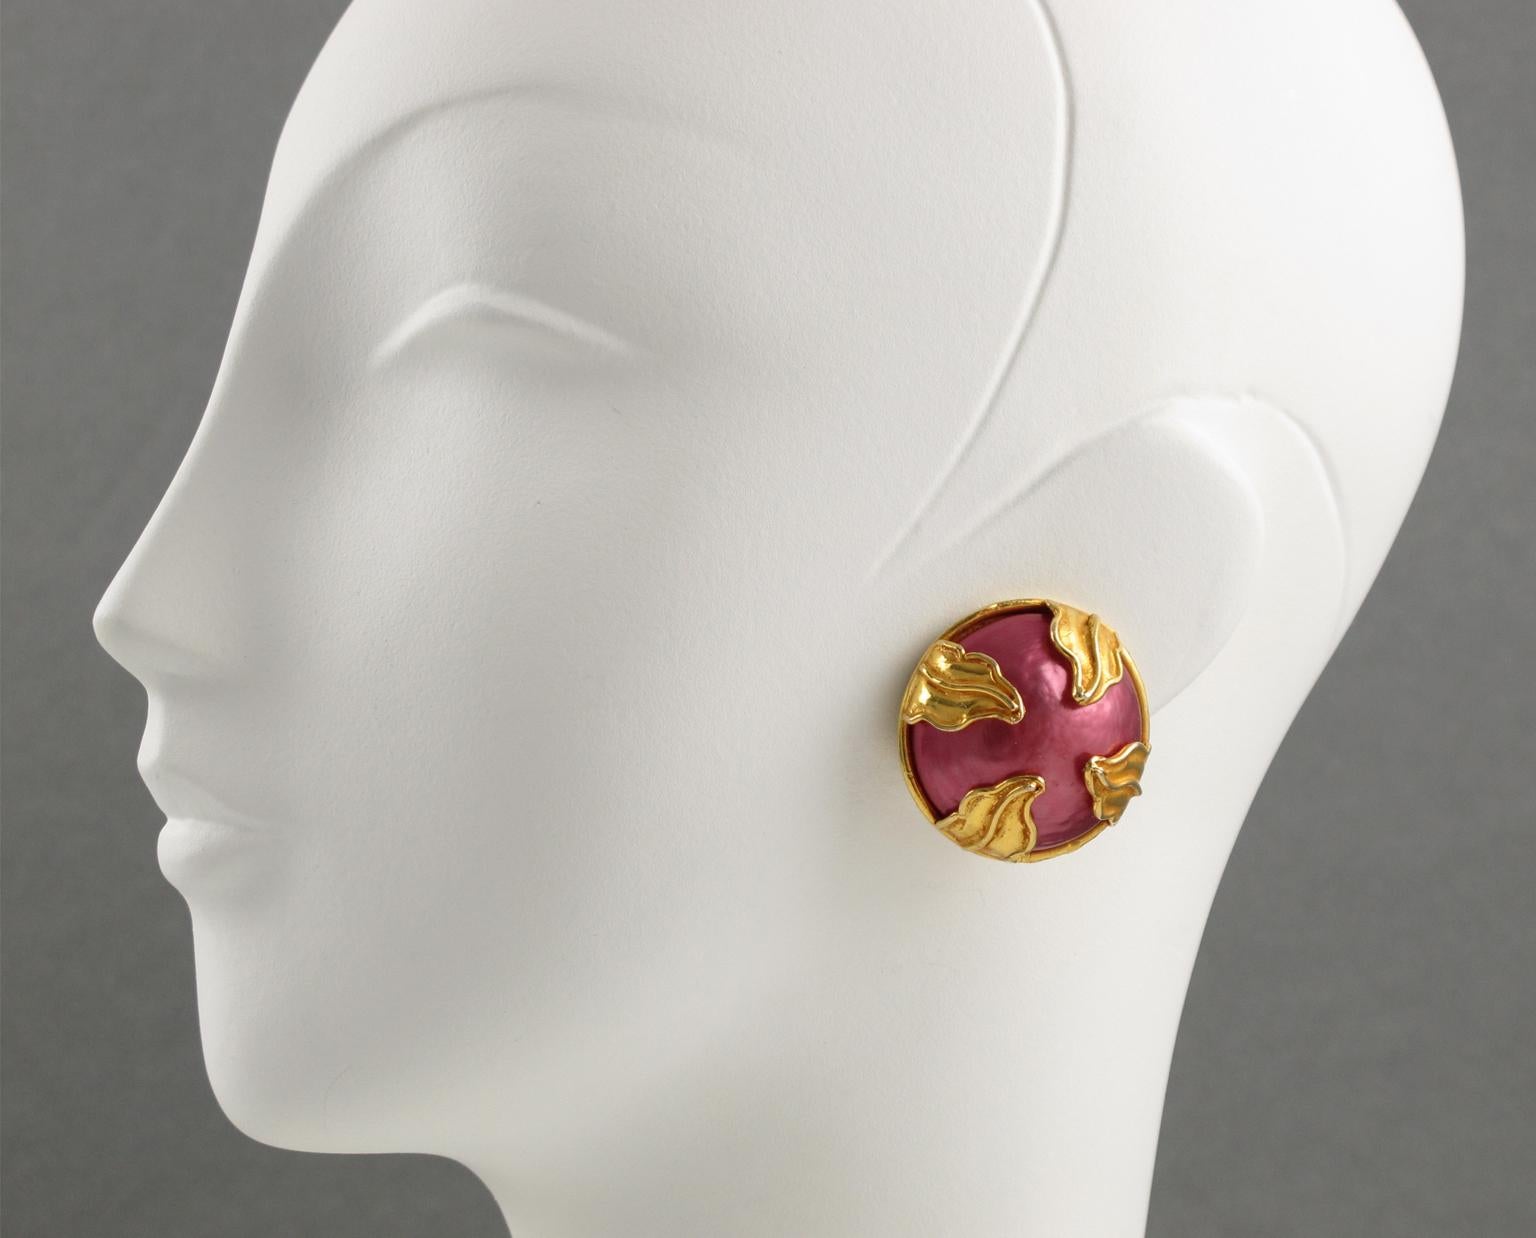 Elegant Dominique Aurientis Paris signed clip-on earrings. Features round gilt metal framing topped with a hot pink pearl-like enamel cabochon ornate with gilt metal leaves. Signed with the 